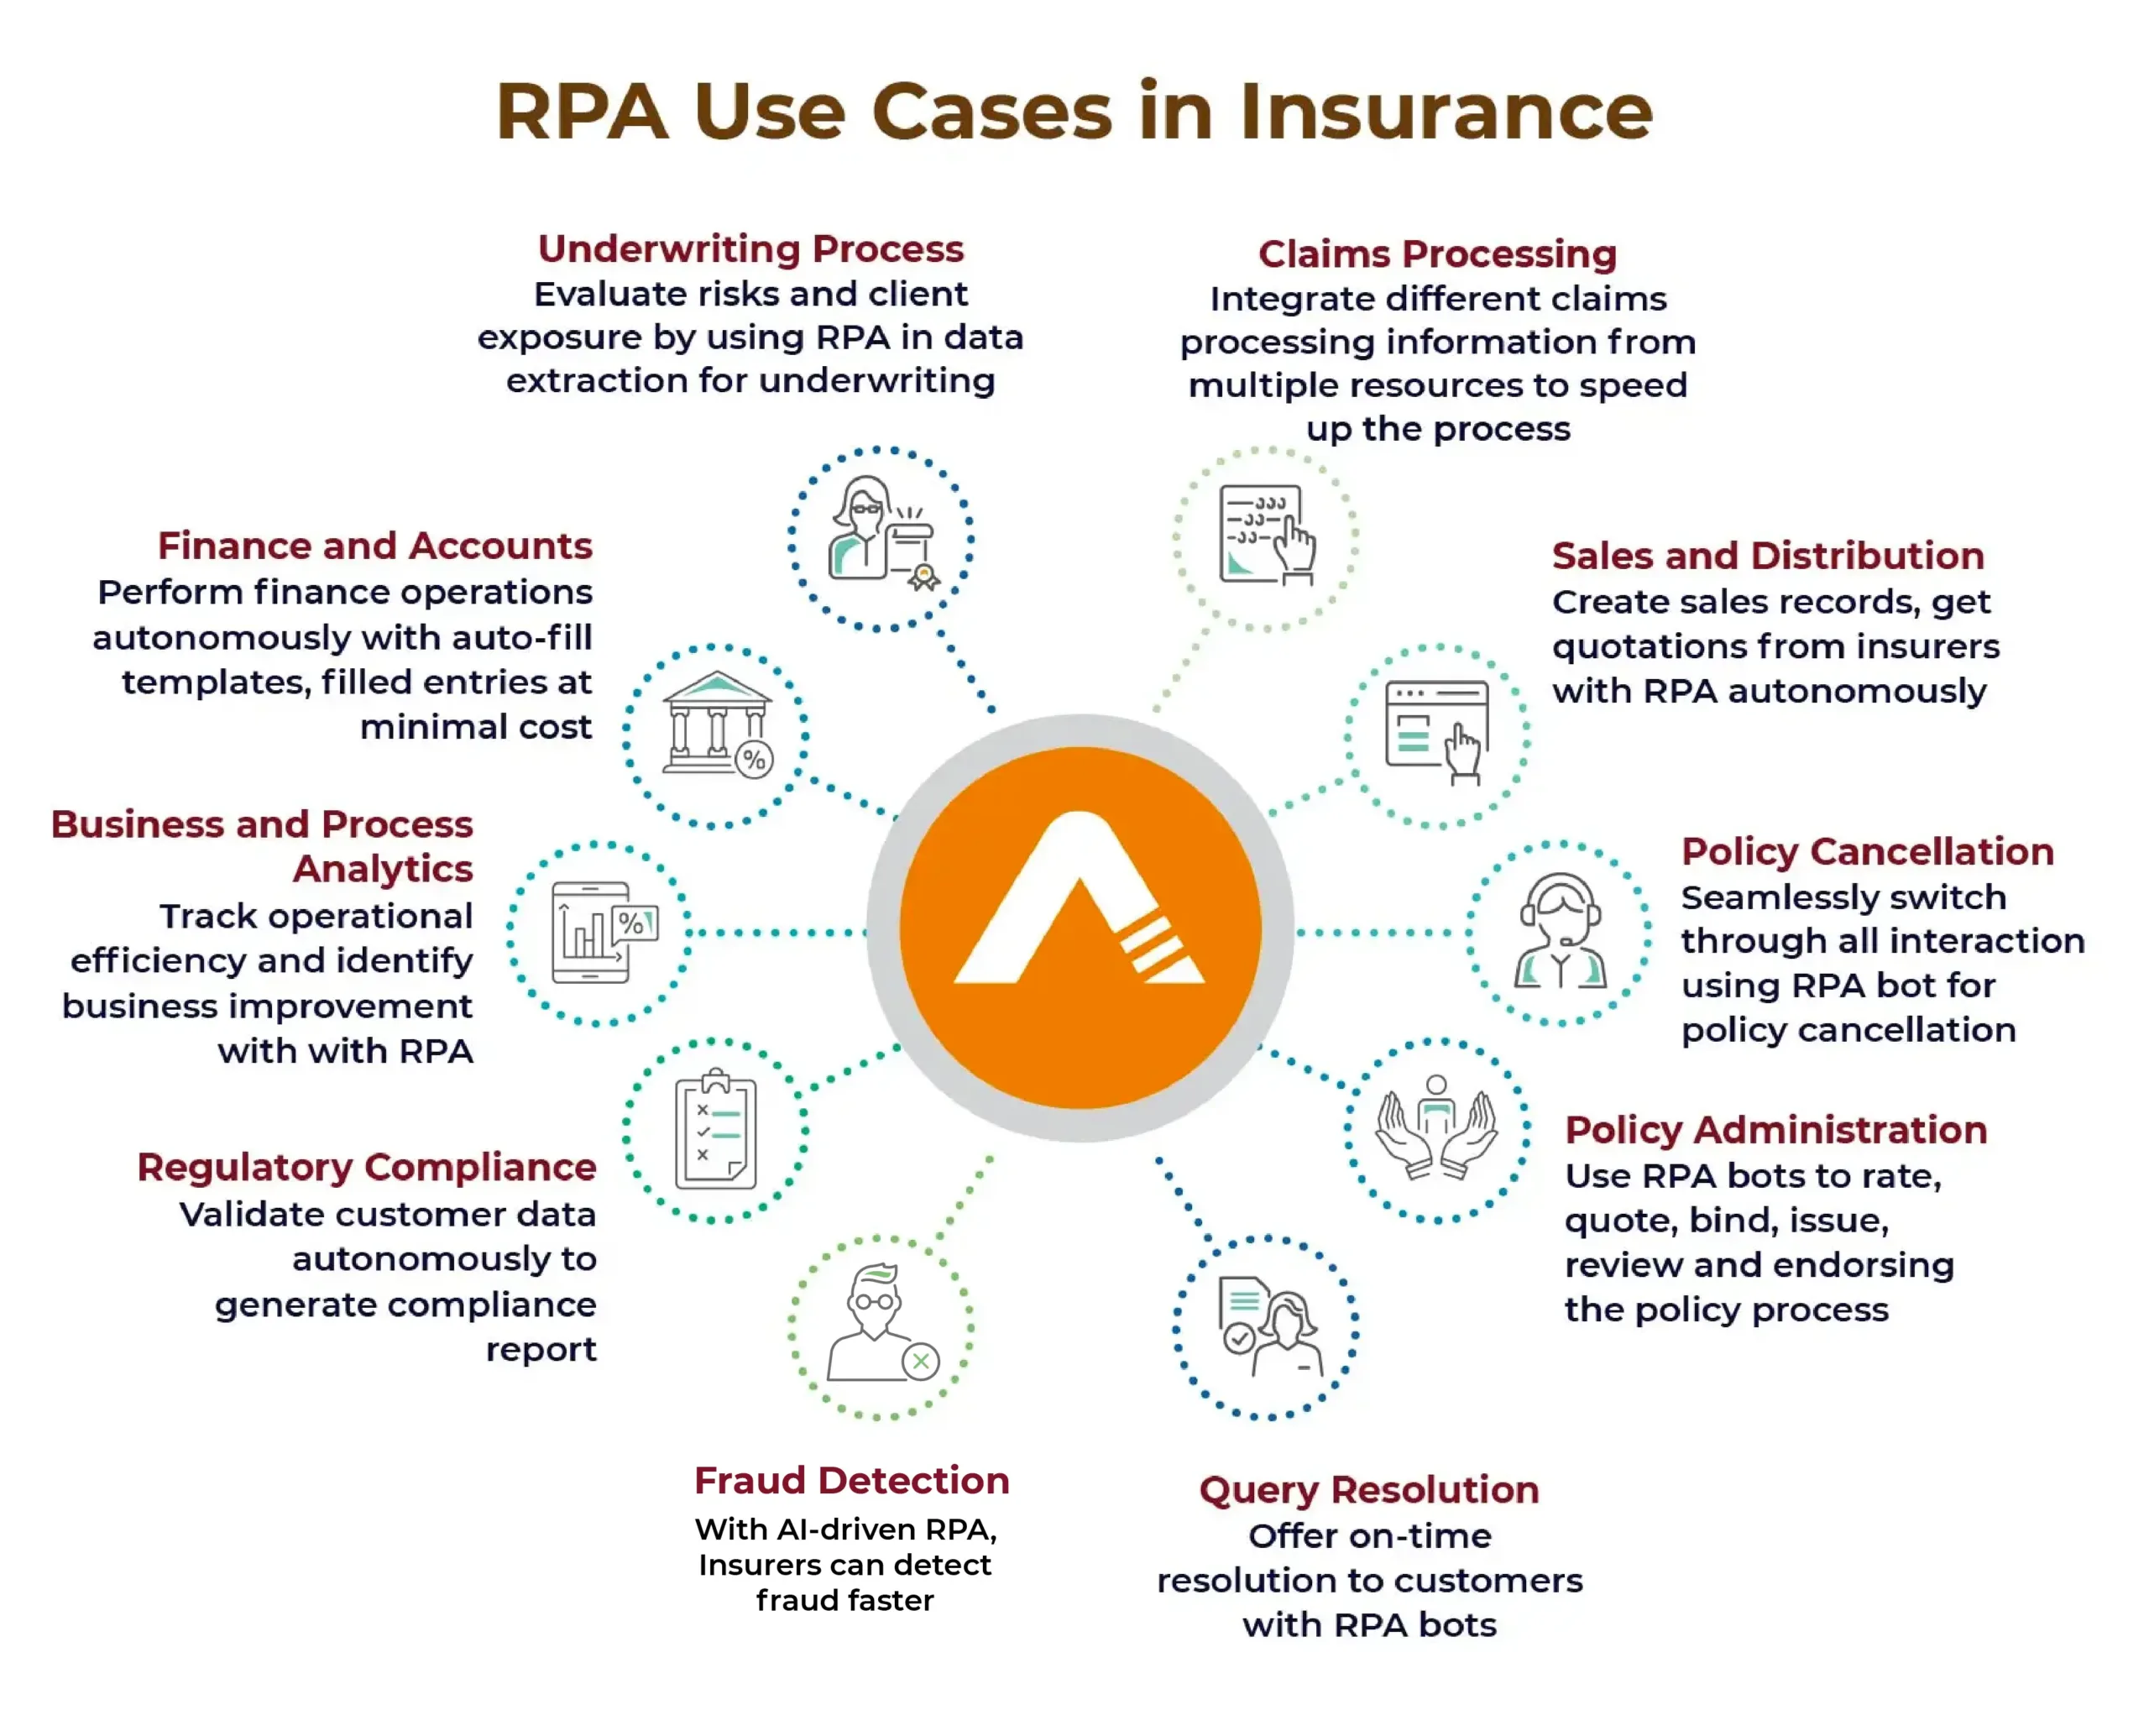 RPA Use Cases in Insurance Industry